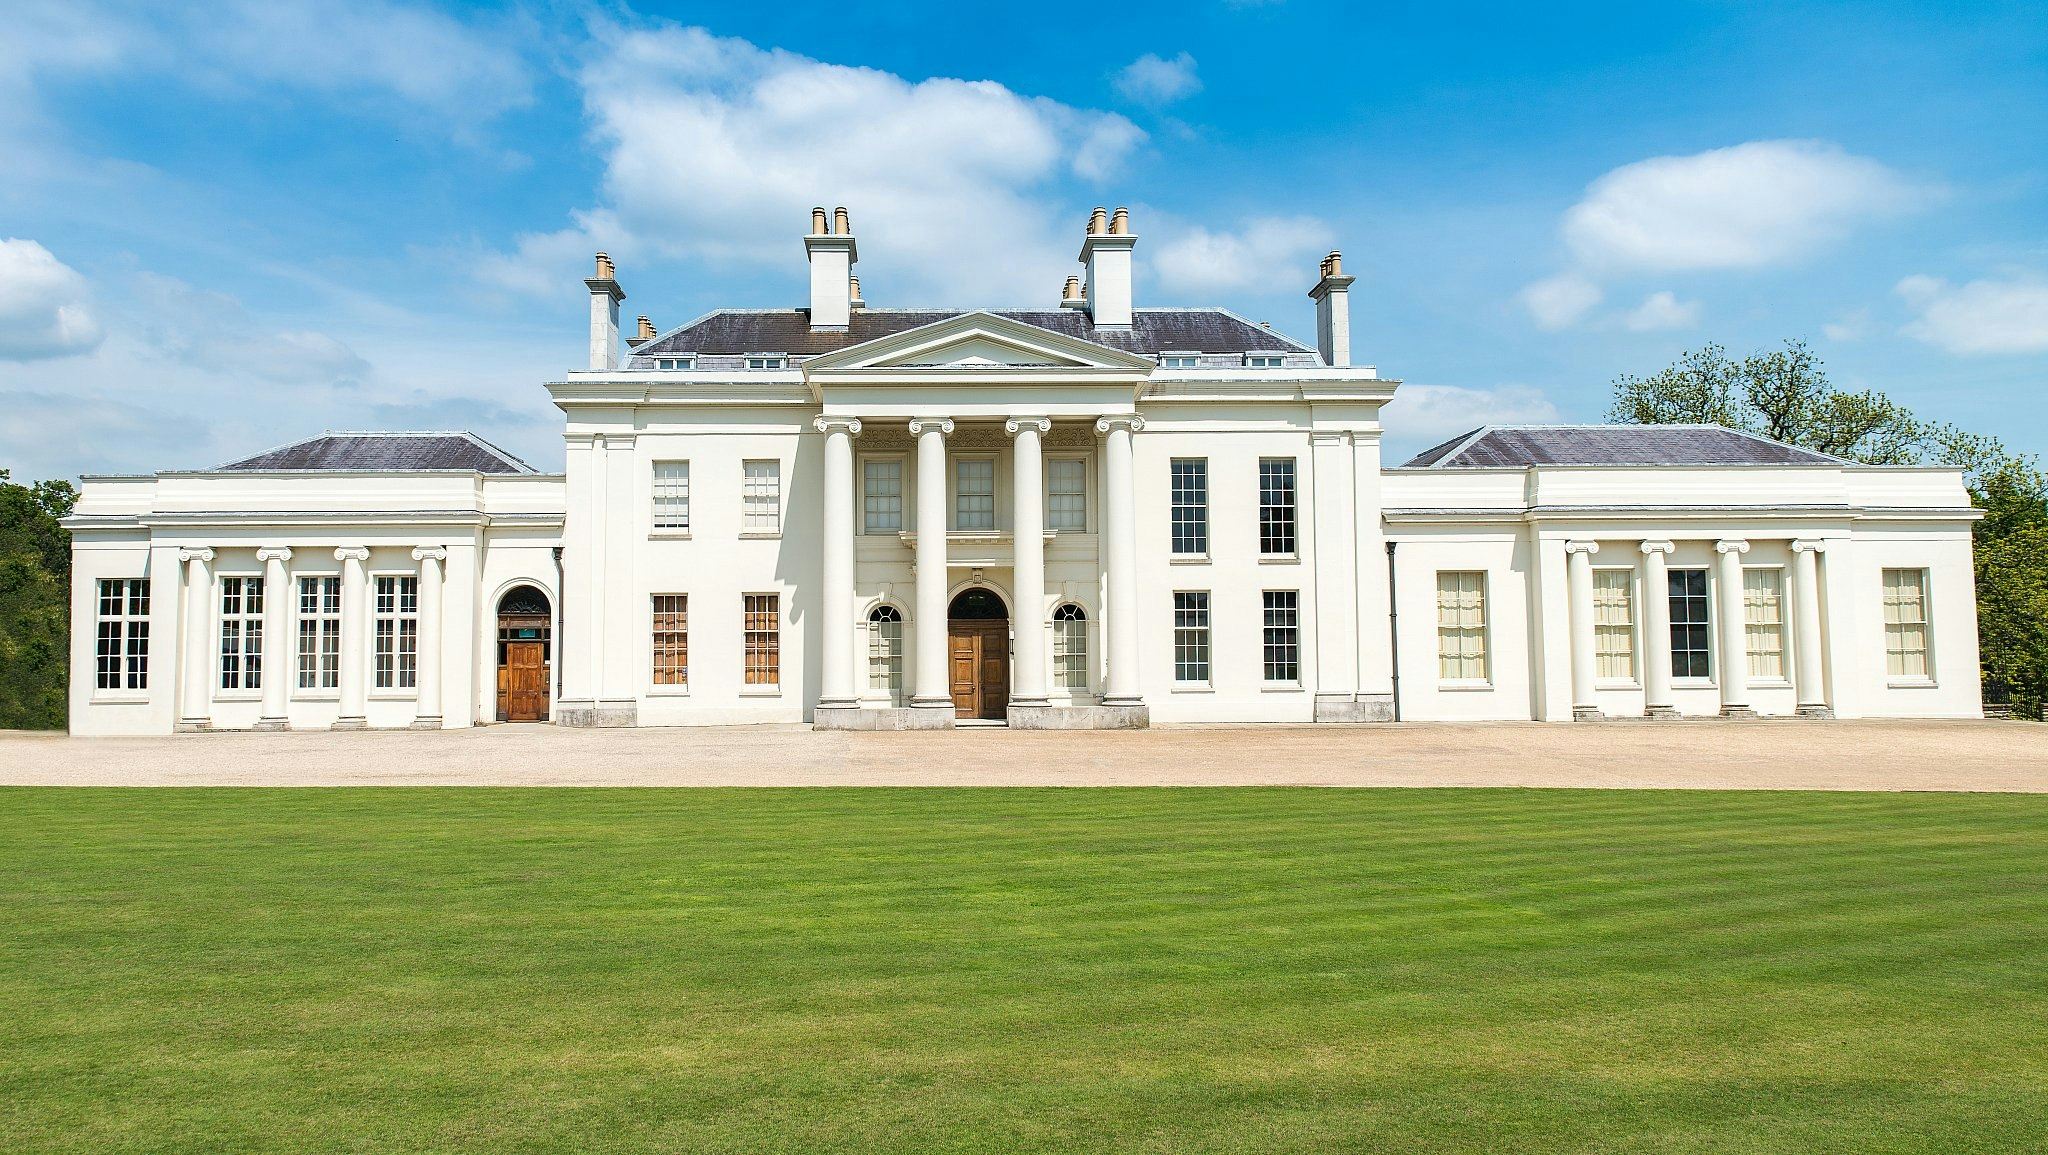 Hylands House, a white neoclassical mansion with a grey roof and a large green lawn in front of it.